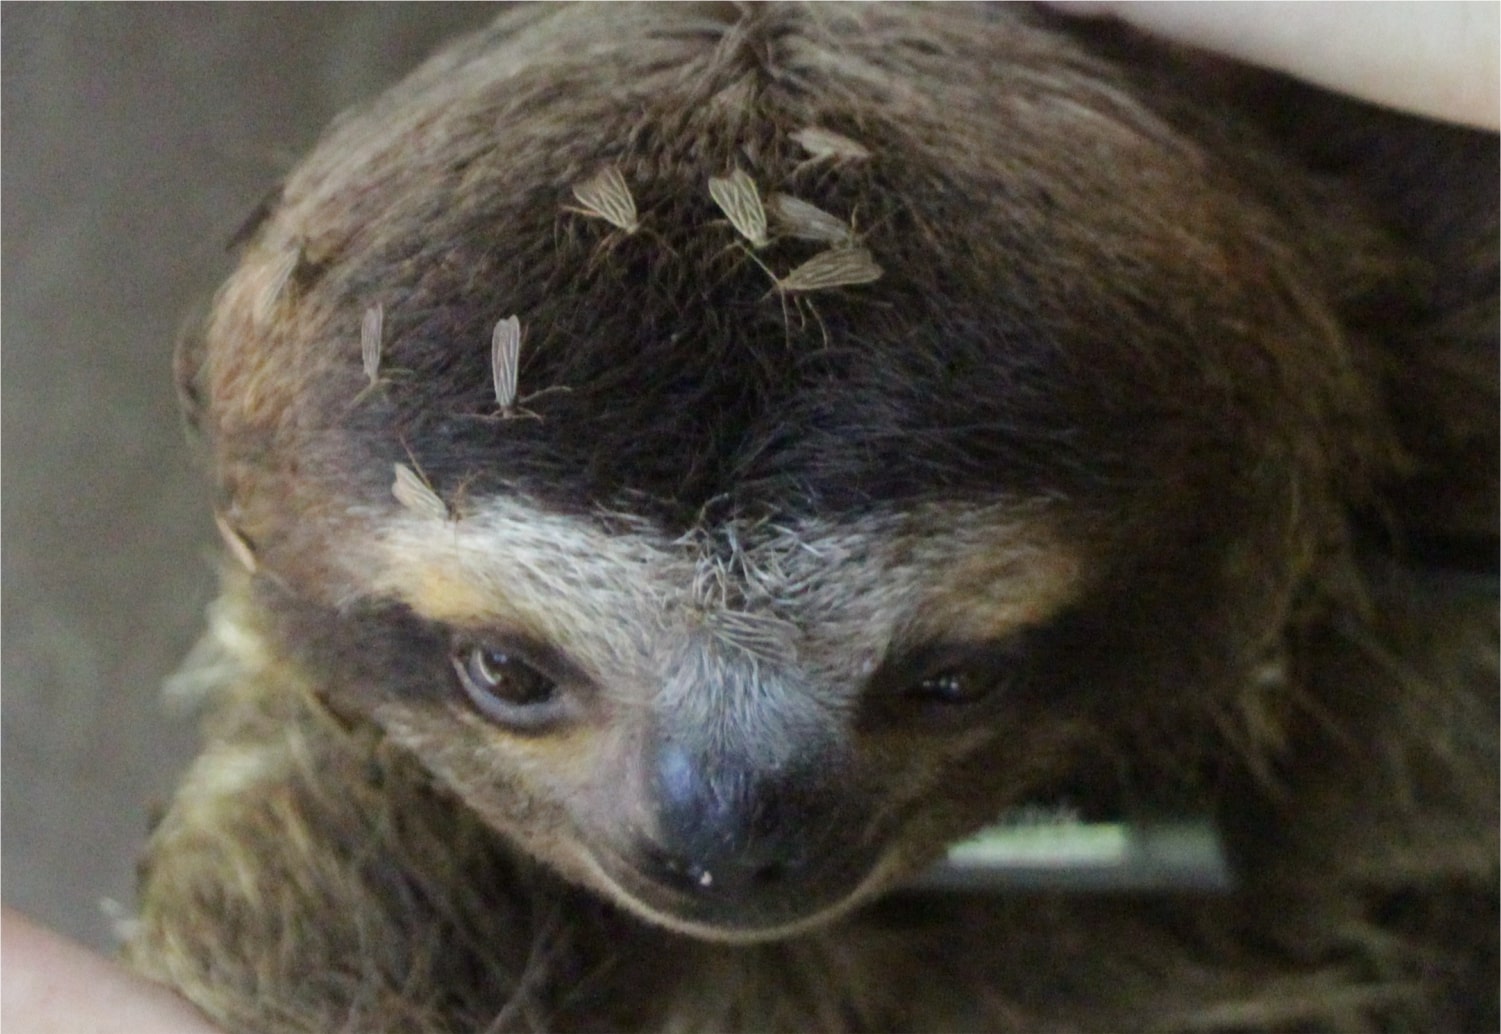 About Sloth Parasites - The Sloth Conservation Foundation